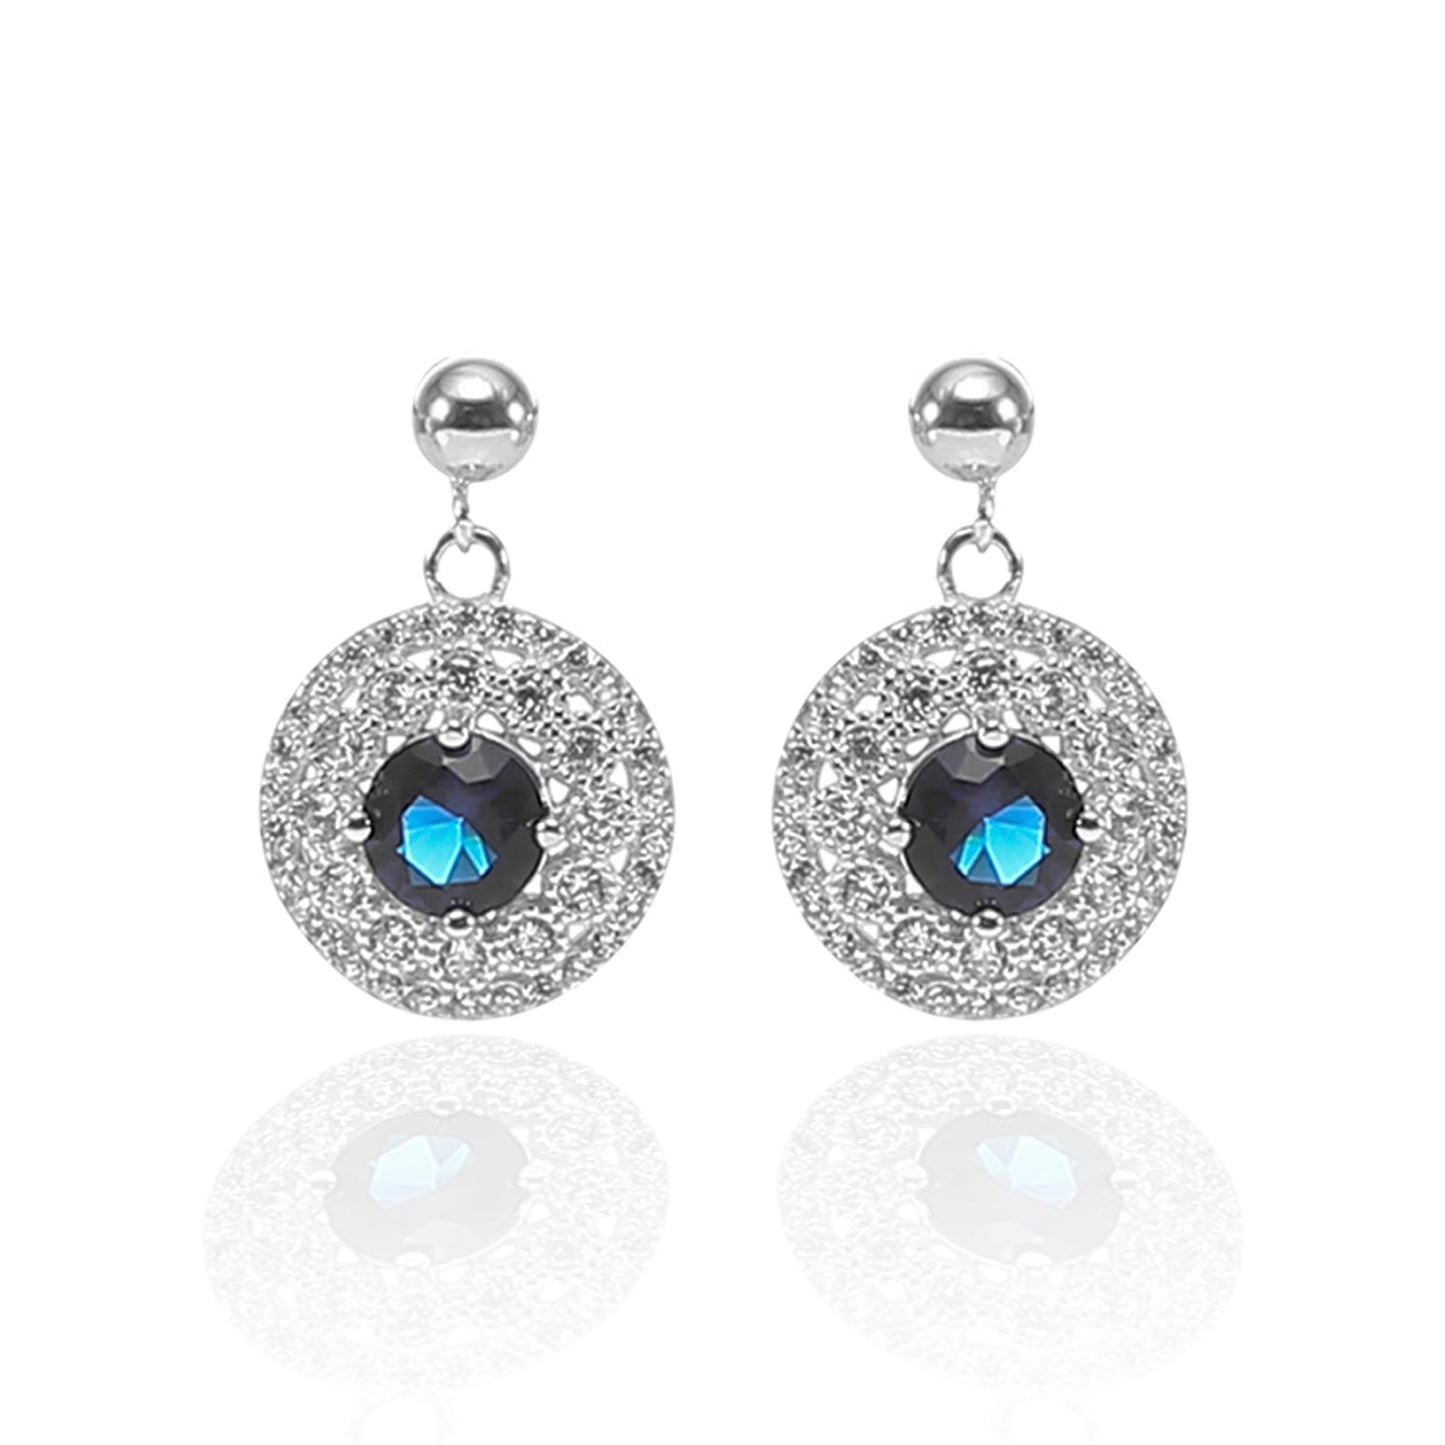 Designer Sapphire Necklace and Earrings Set - ARJW1008RD ARCADIO